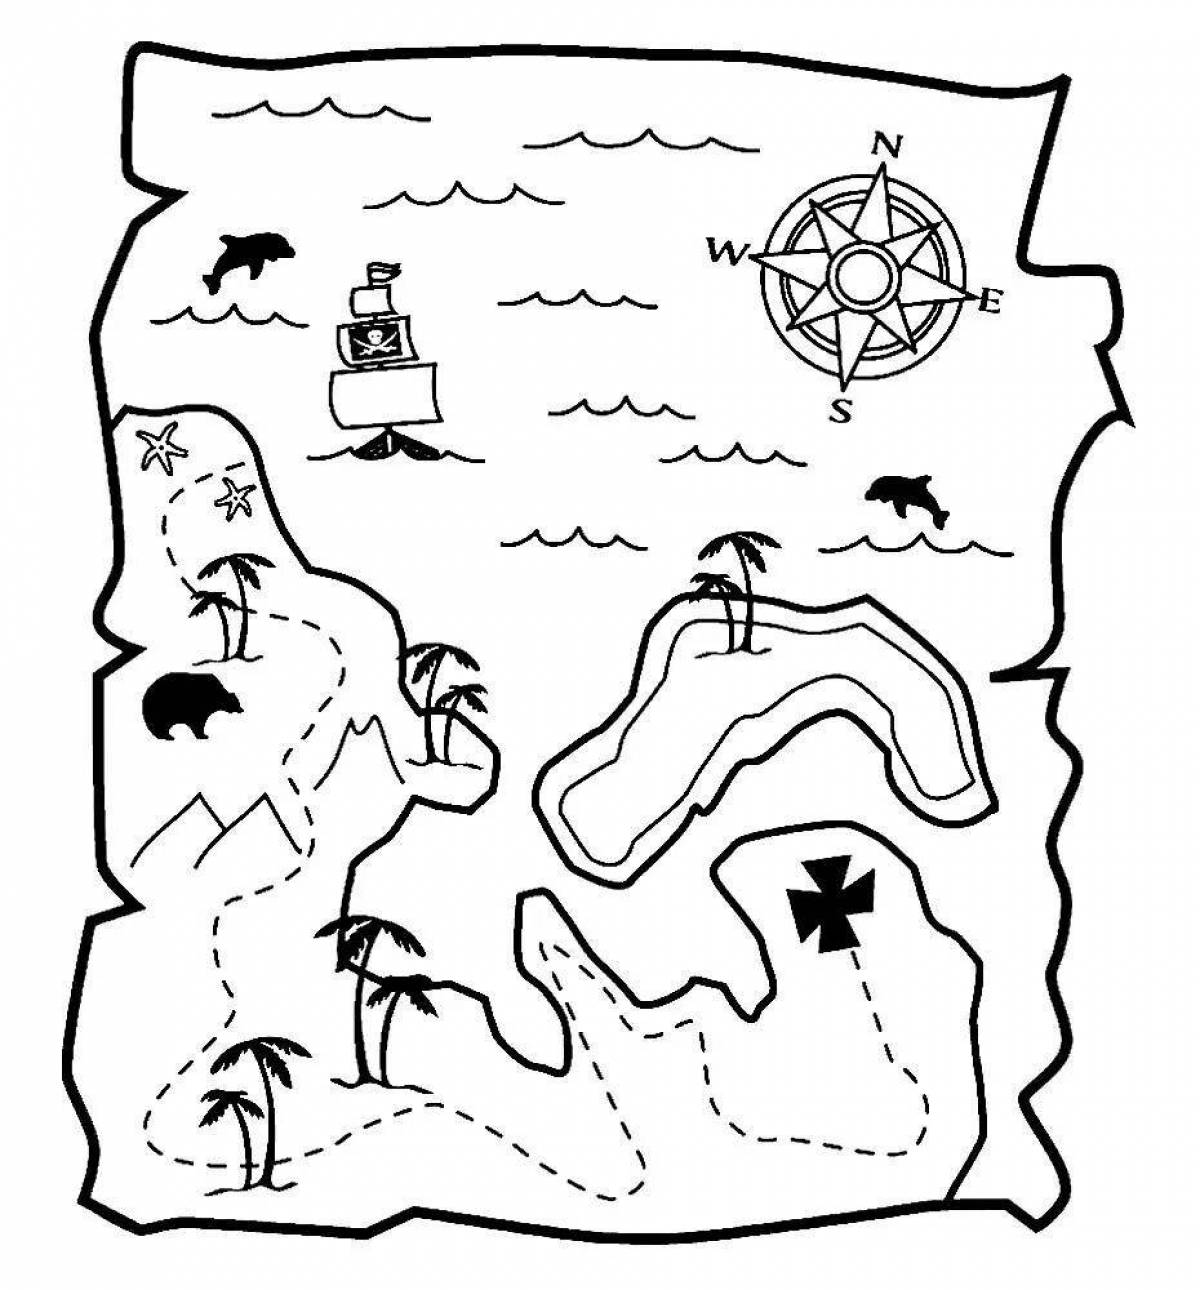 Bright Pirate Map Coloring Page